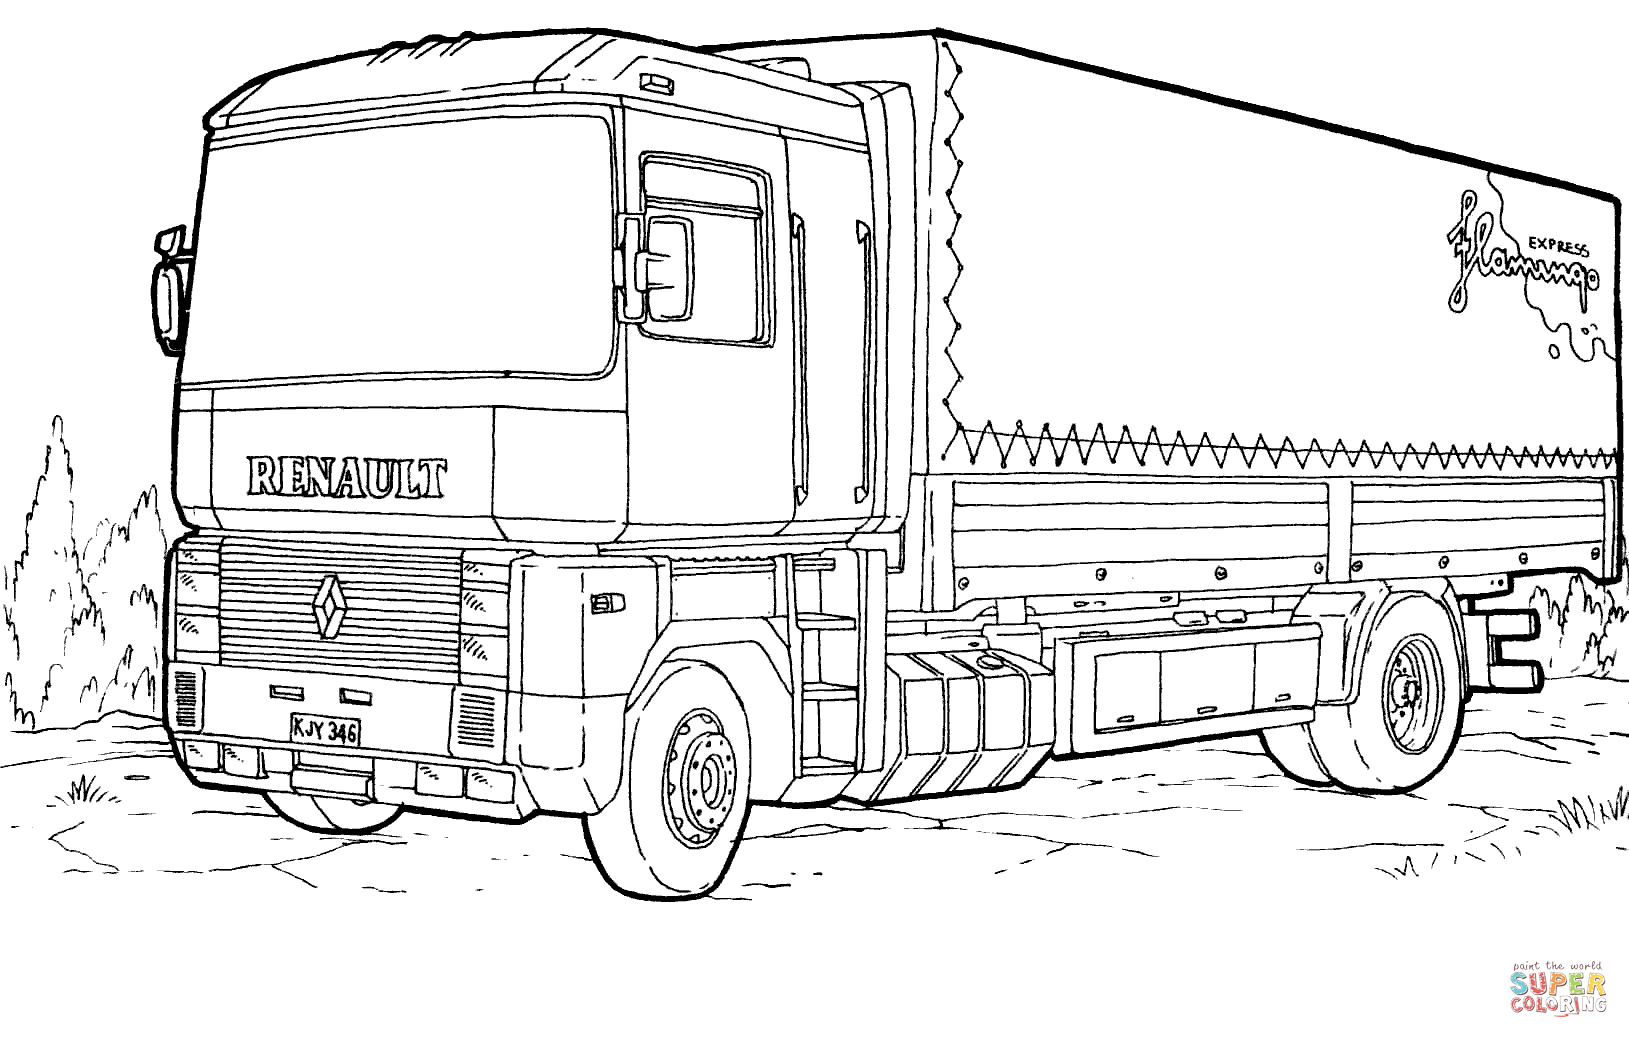 Renault Magnum Coloring Page Truck Coloring Pages Coloring Pages Coloring Pages For B